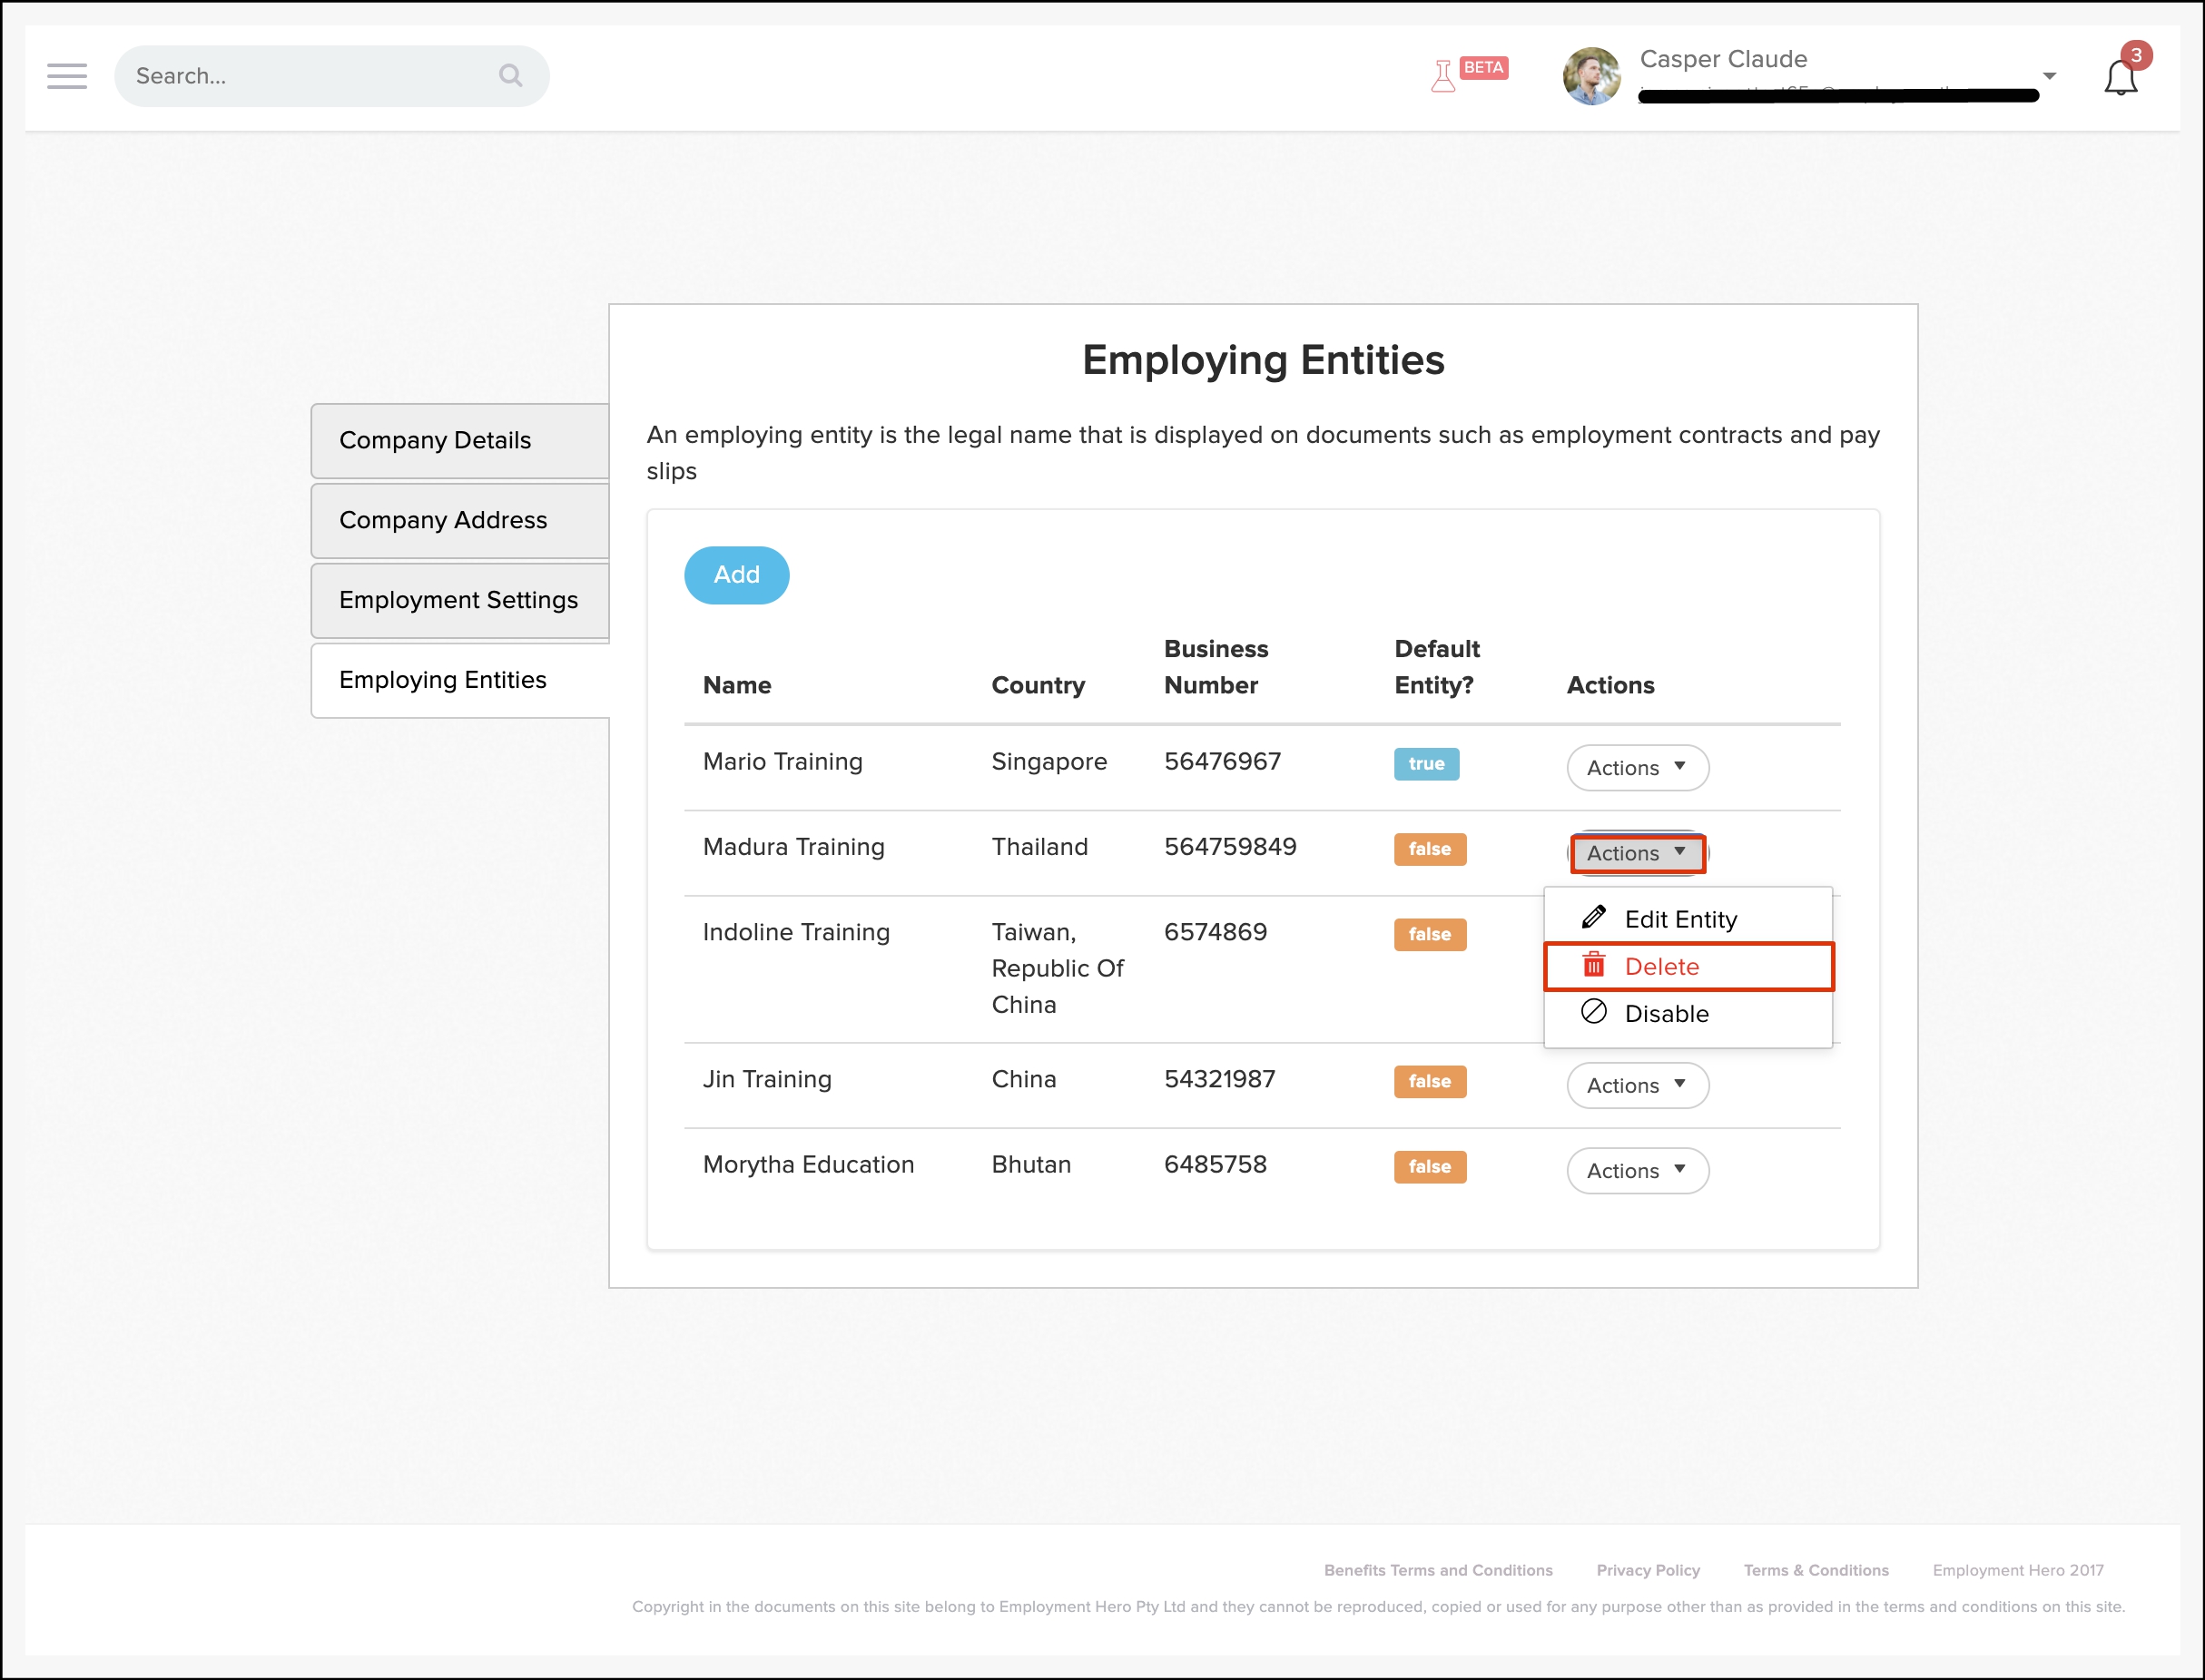 screenshot of the employing entities page. to the left of the screen you have the options company details, company address, employment settings, employing entities. employing entities is selected. on the screen reads employing entities. an employing entity is the legal name that is displayed on documents such as employment contracts and pay slips. below is an add button. below that is a table of company names vertically. horizontally they are sorted by name, country, business number, default entry status and action option. the action button for the first company entry is highlighted in red giving the option to delete the entry